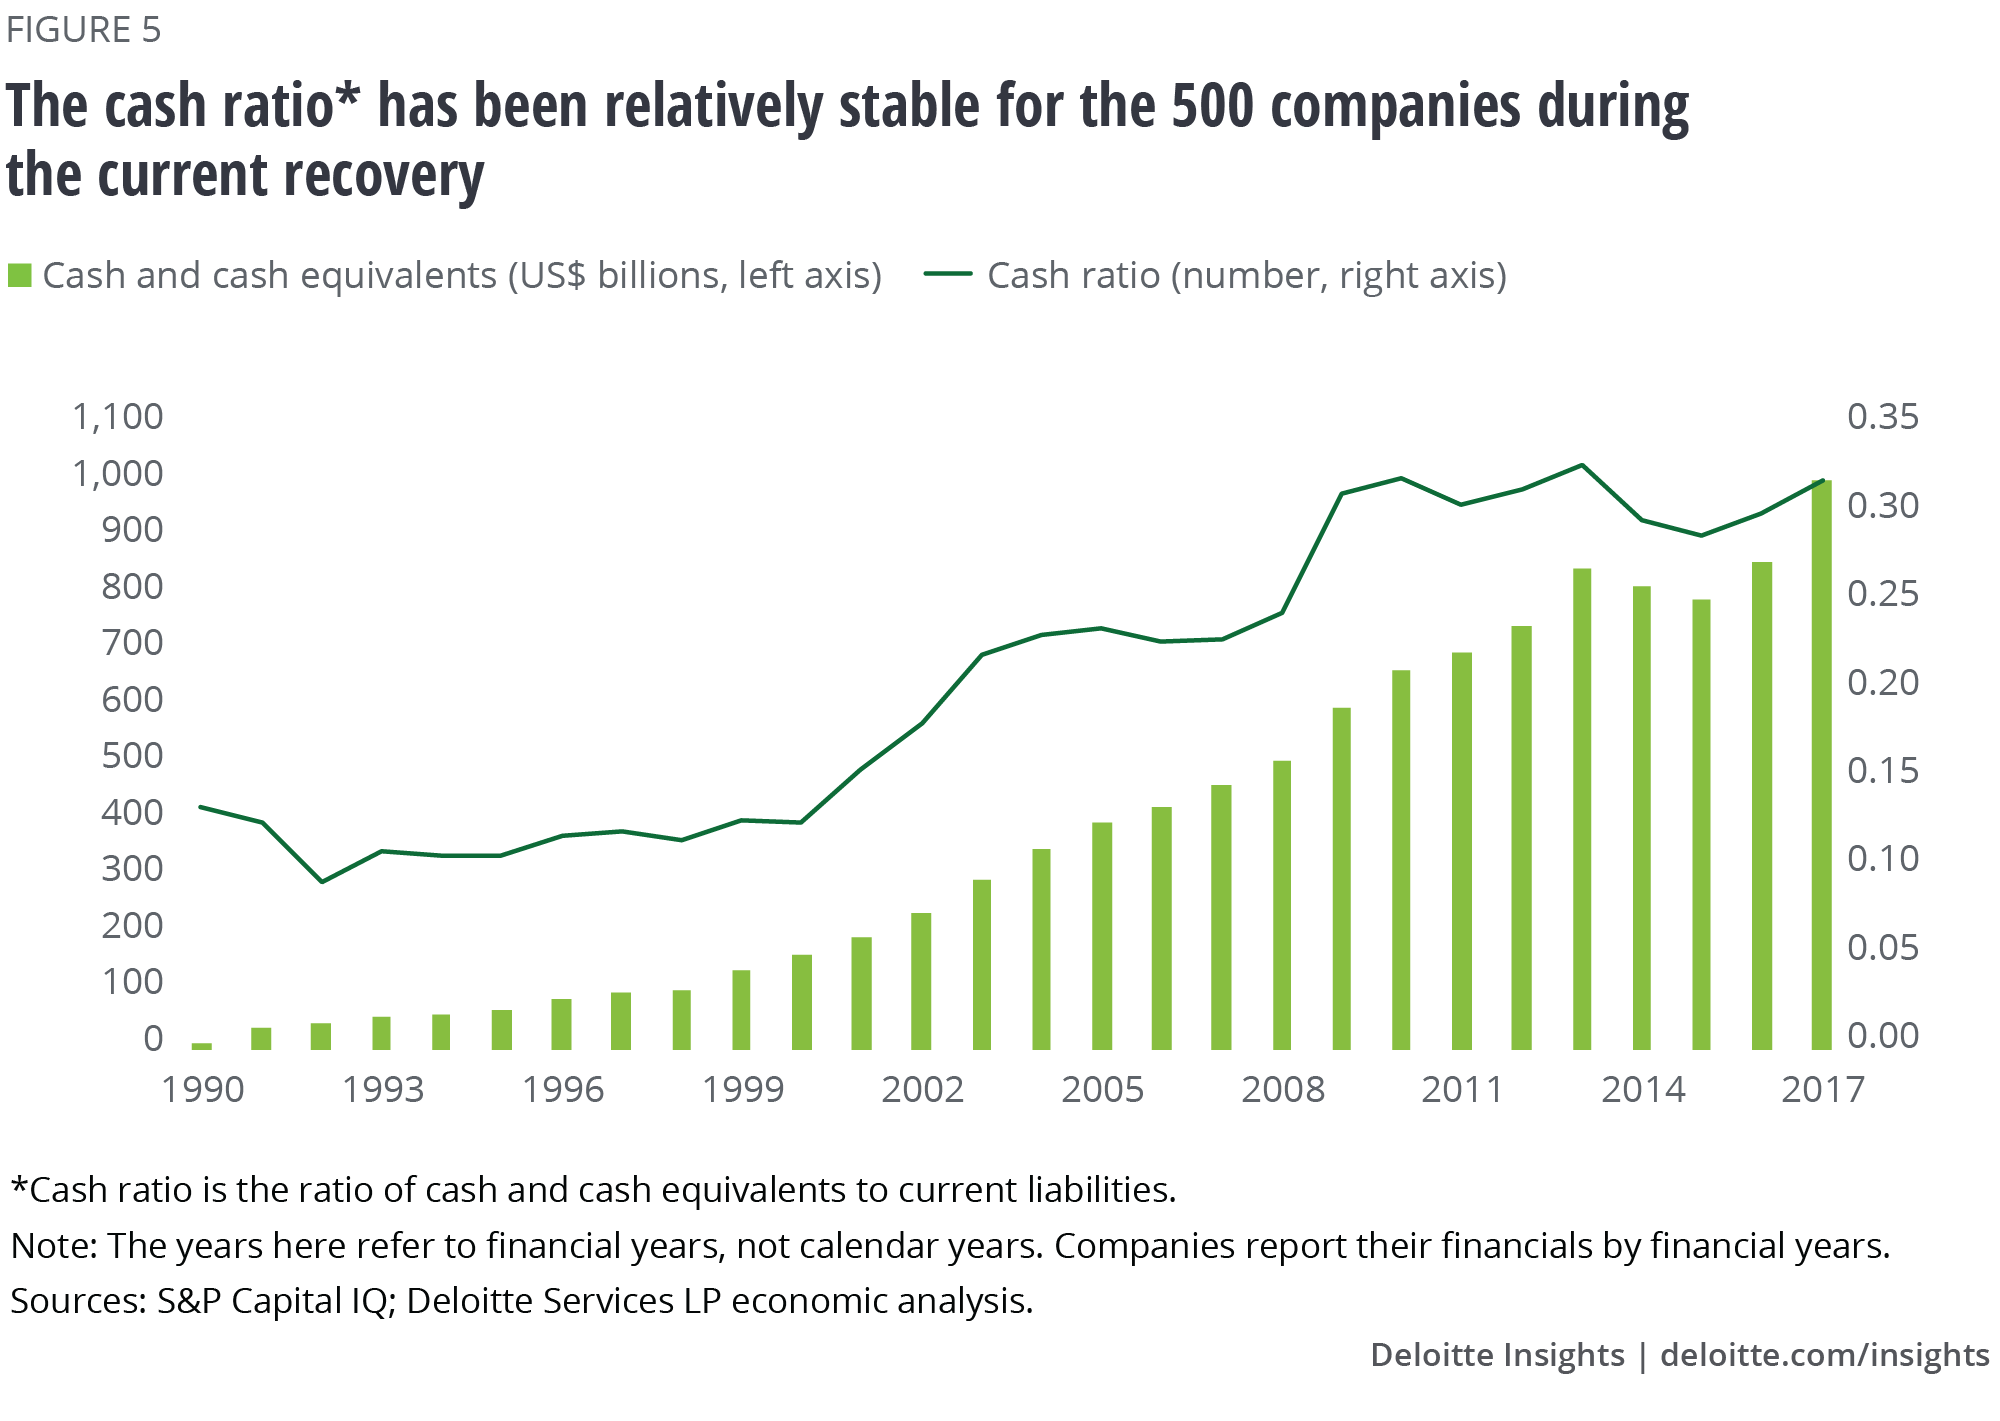 The cash ratio* has been relatively stable for the 500 companies during the current recovery